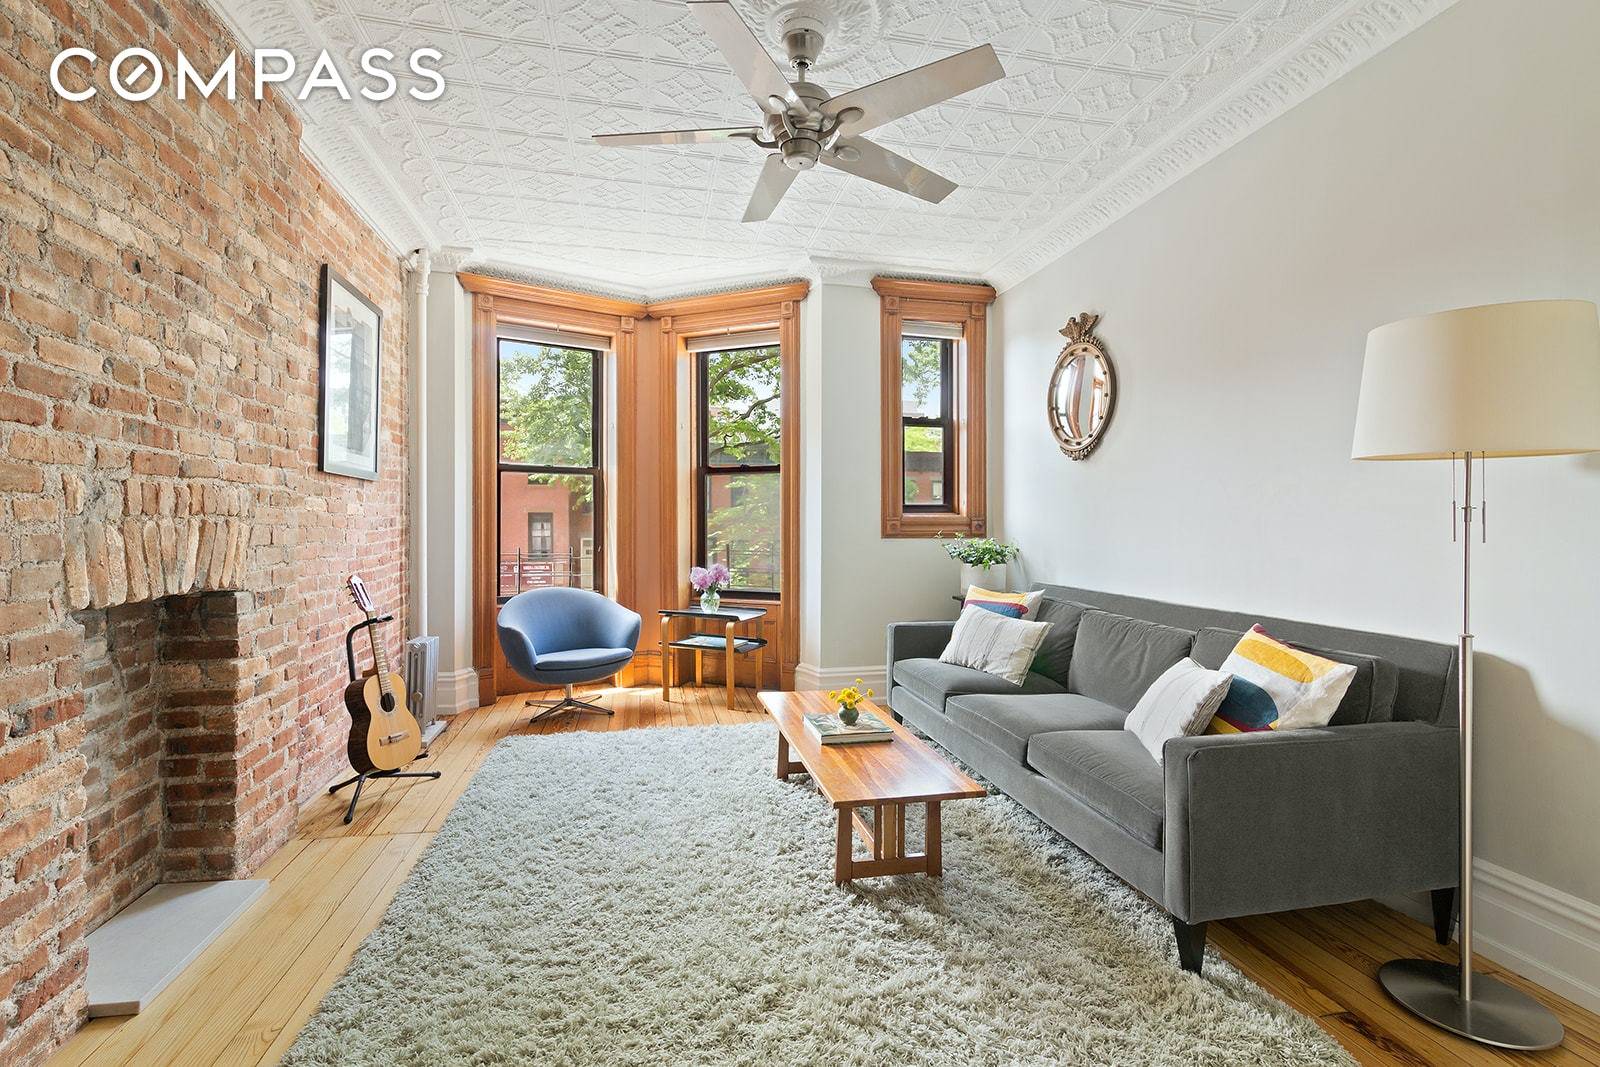 Gorgeous mix of prewar charm and modern appeal in this stunning Park Slope home.